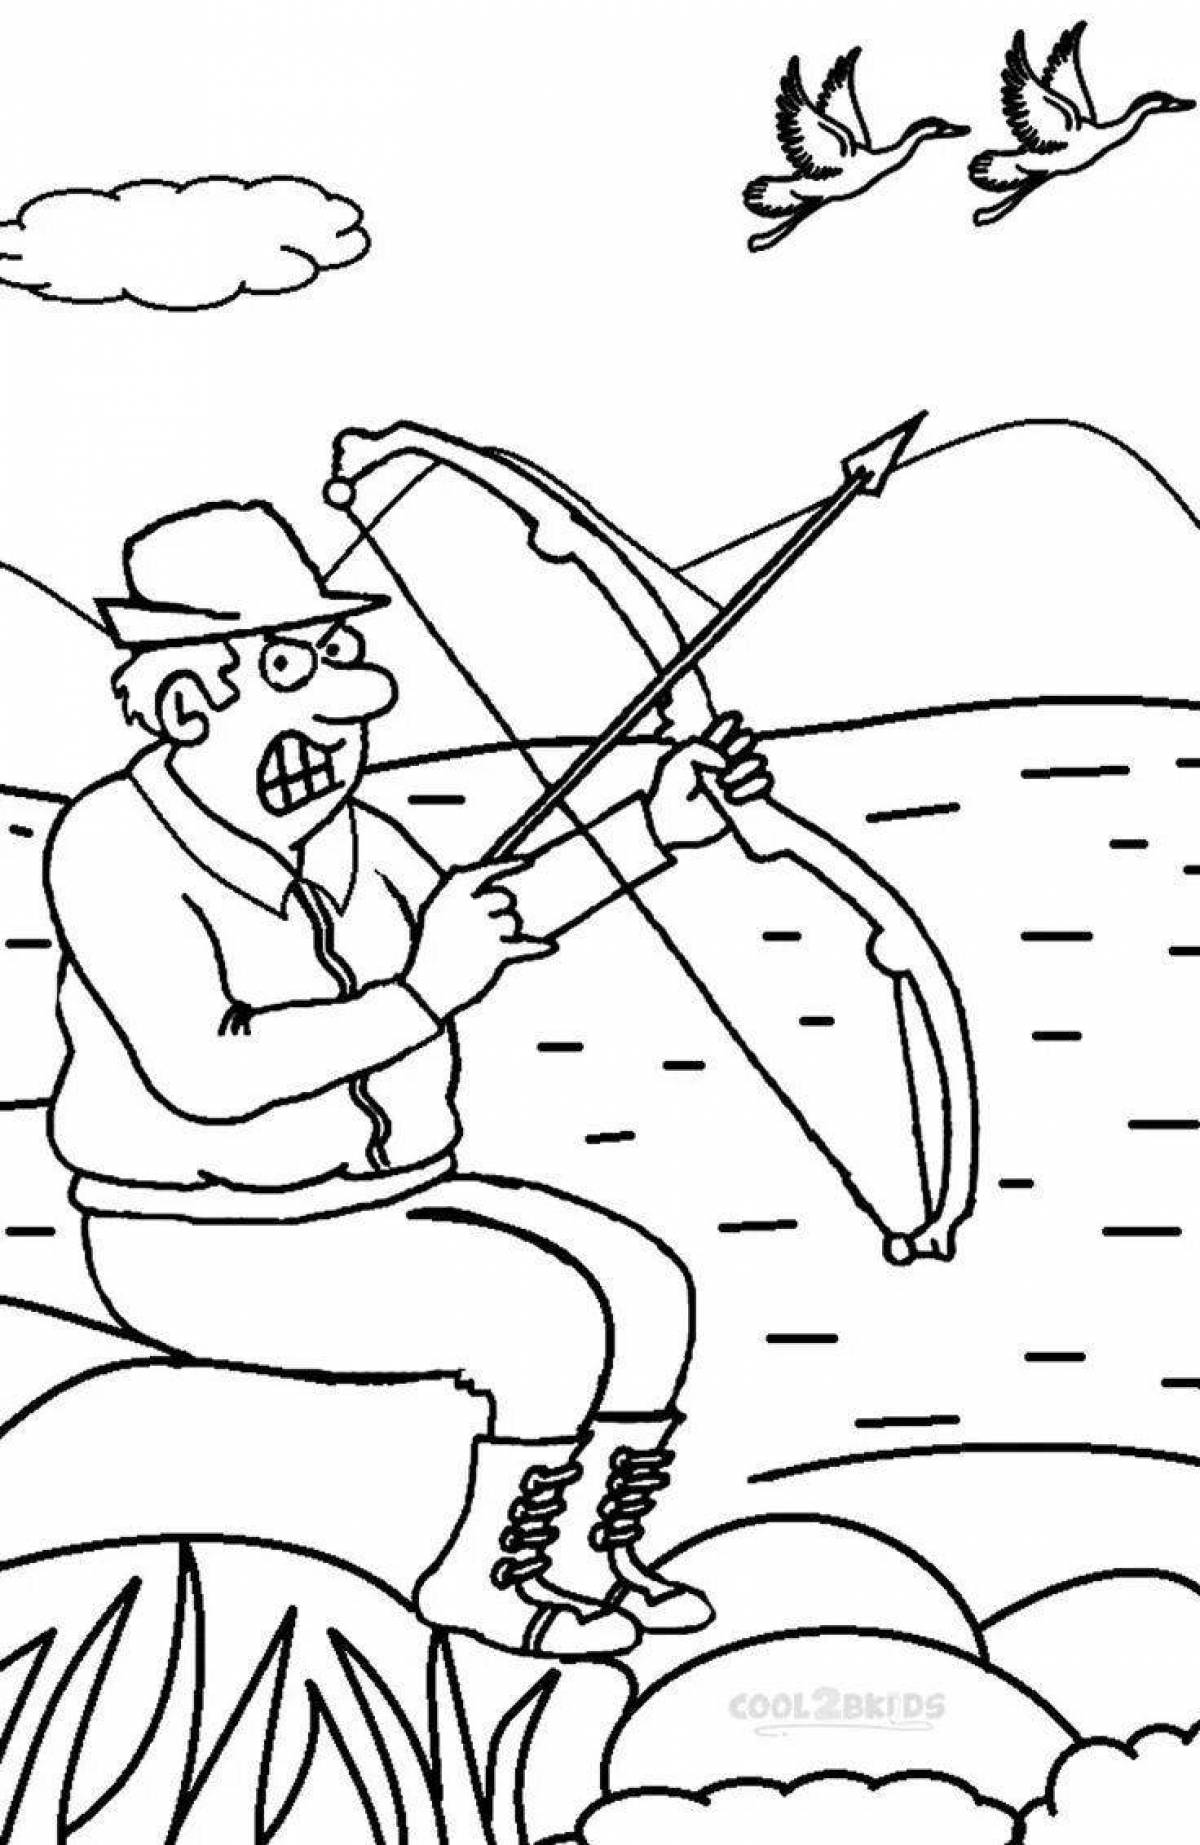 Adventure hunter coloring pages for kids